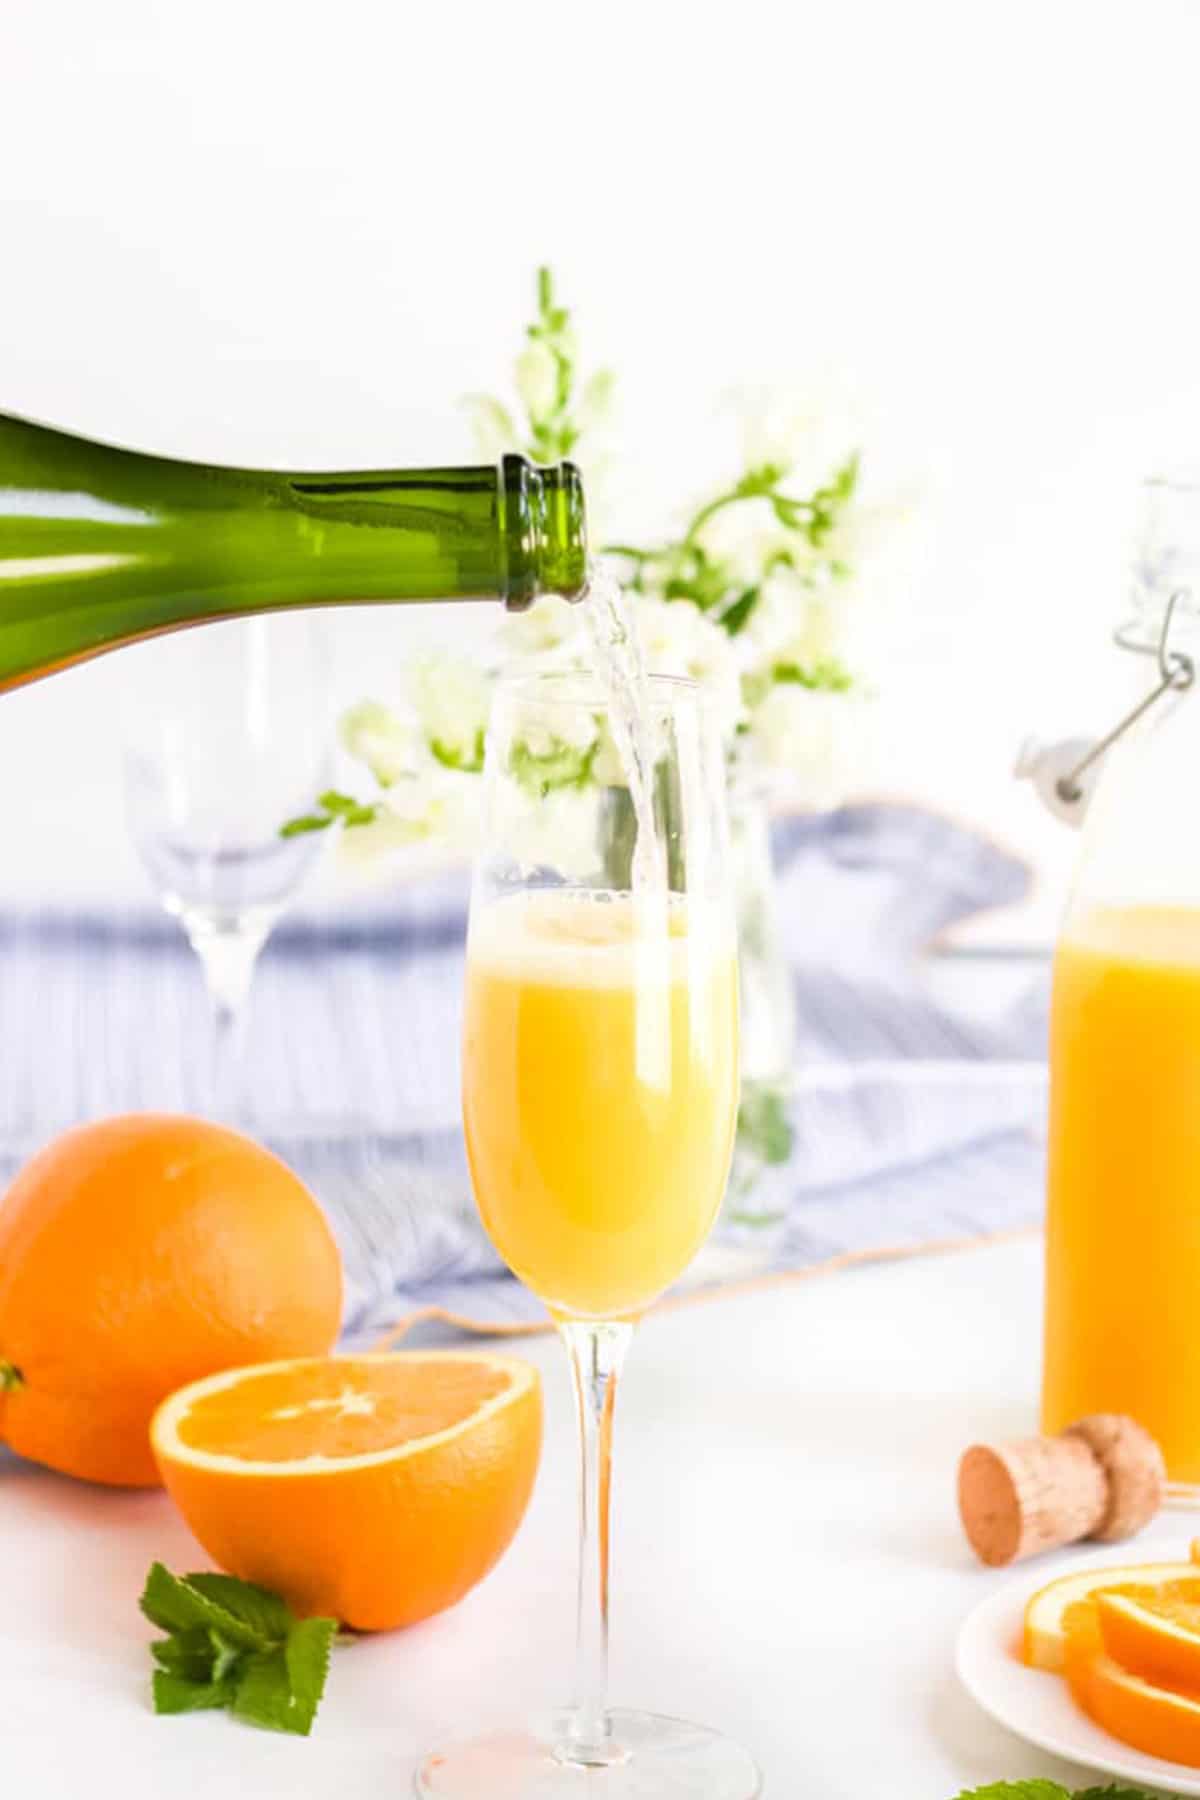 Champagne being poured into a glass of orange juice to make a mimosa. 